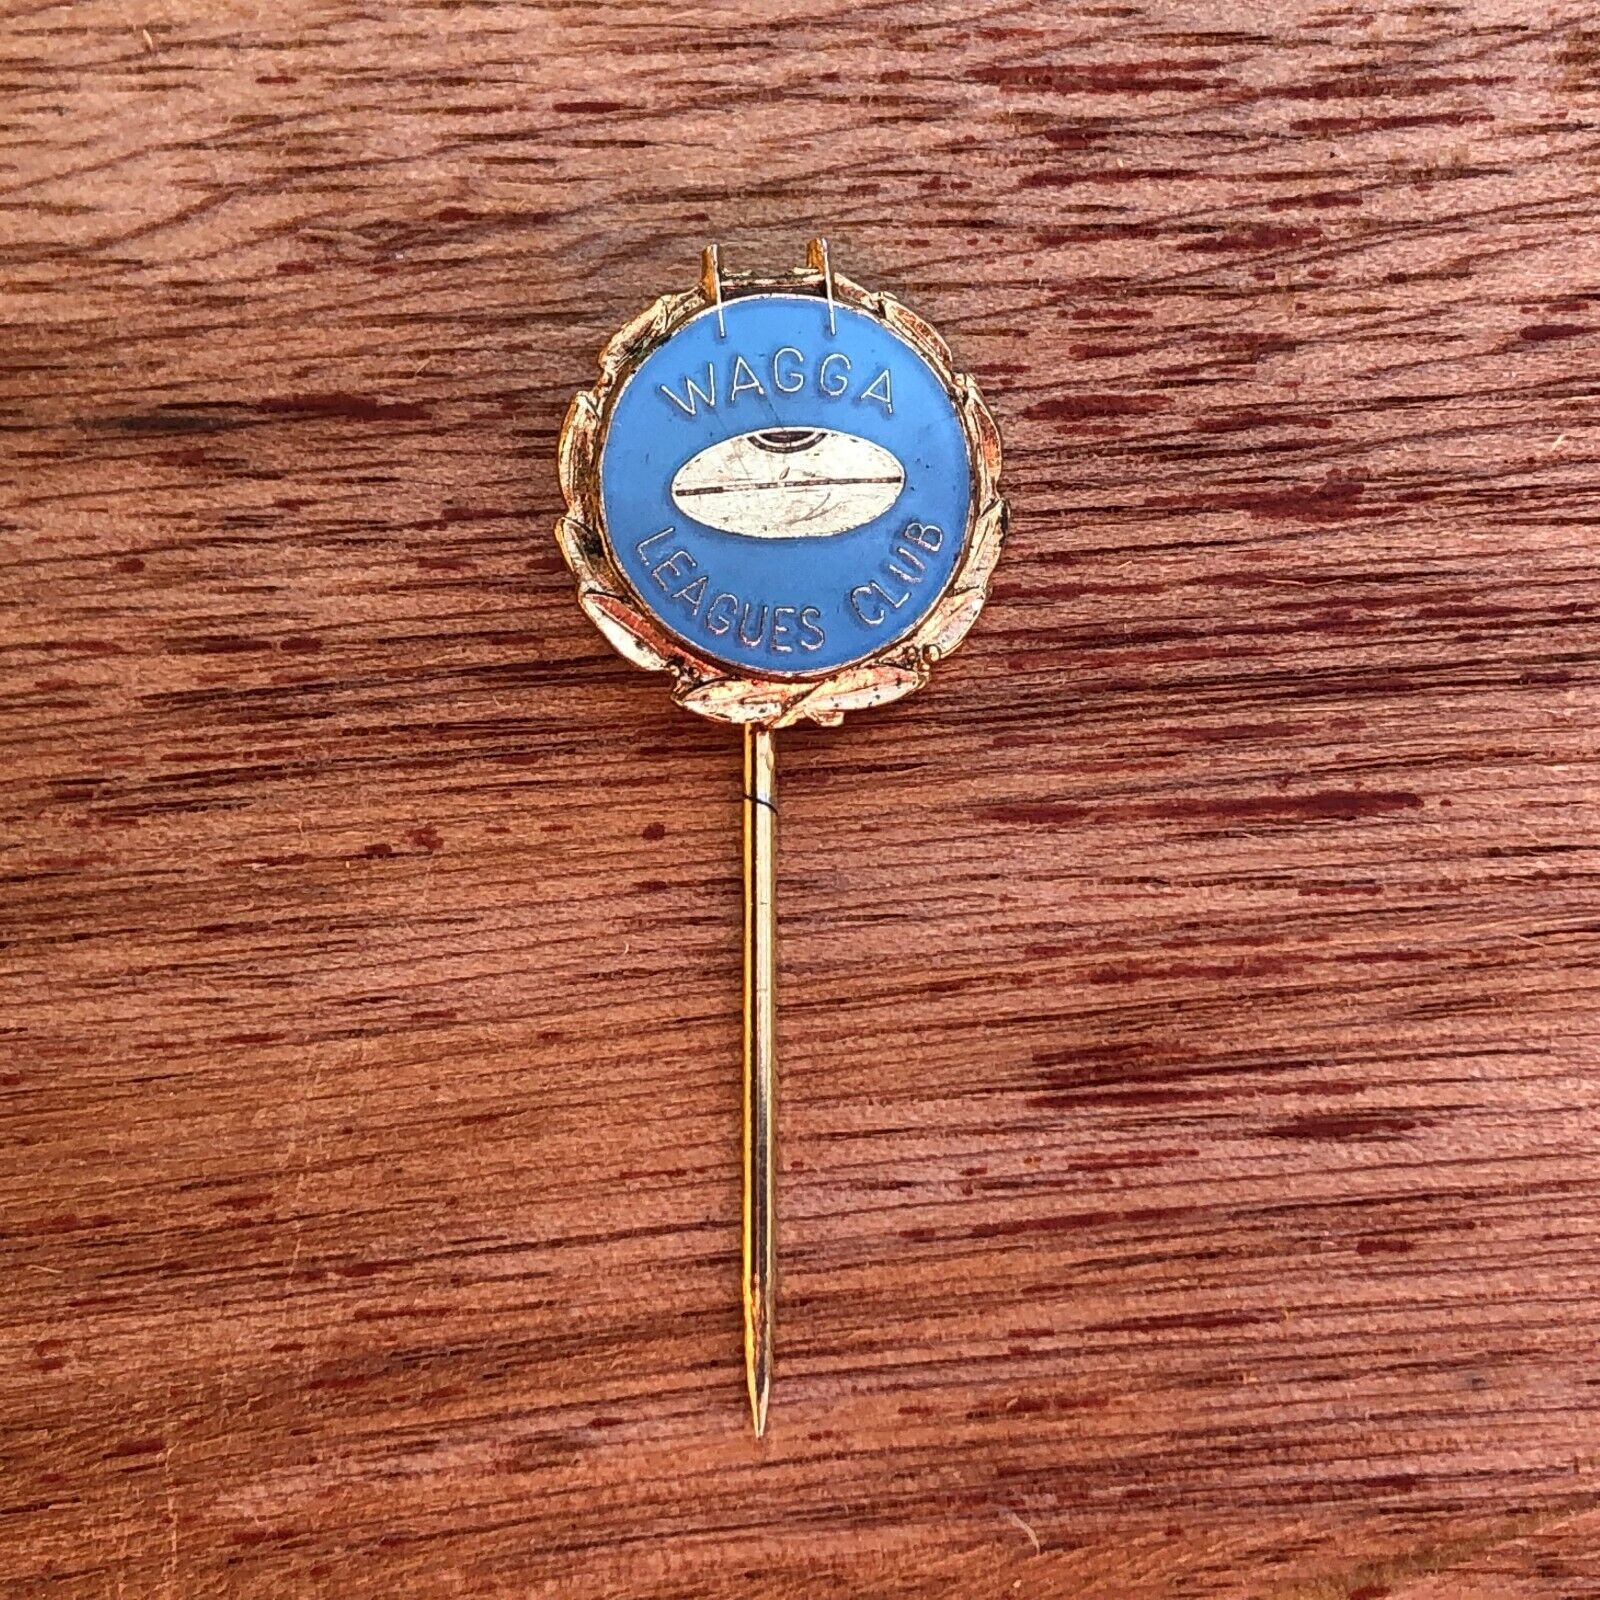 Vintage Wagga Leagues Club Enamel Stickpin Stick Pin Rugby A4